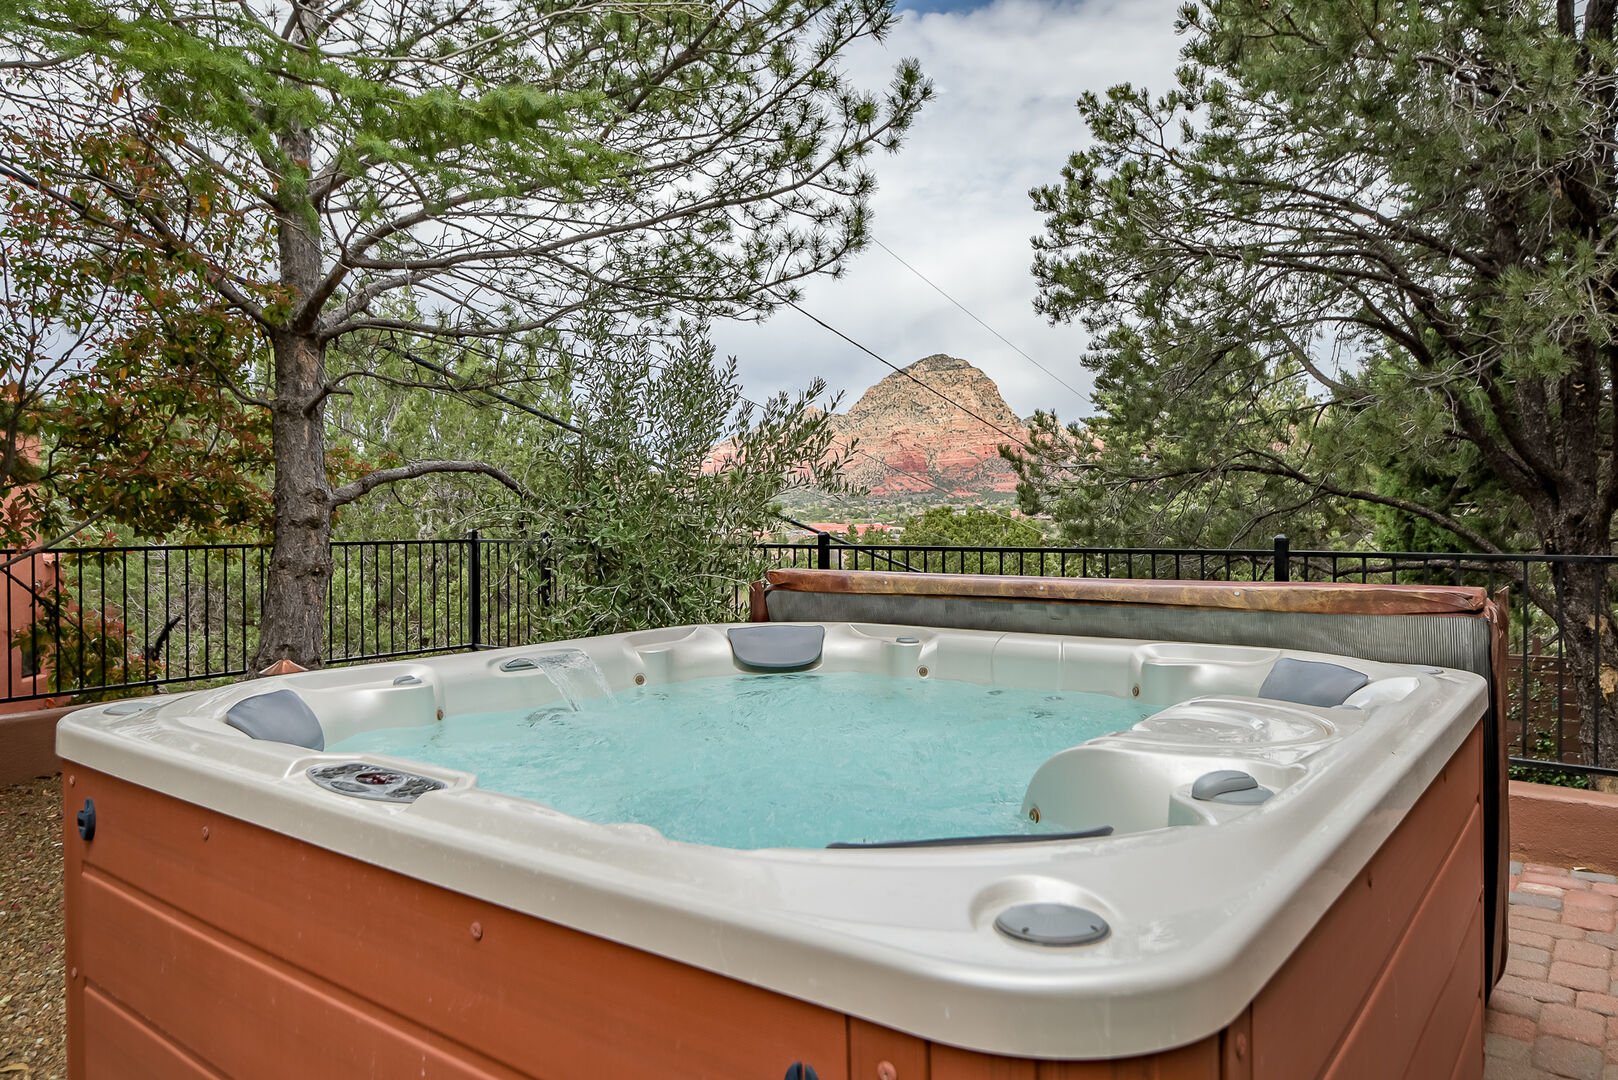 Take a Dip in the Private Hot Tub and Enjoy the Red Rock Views!